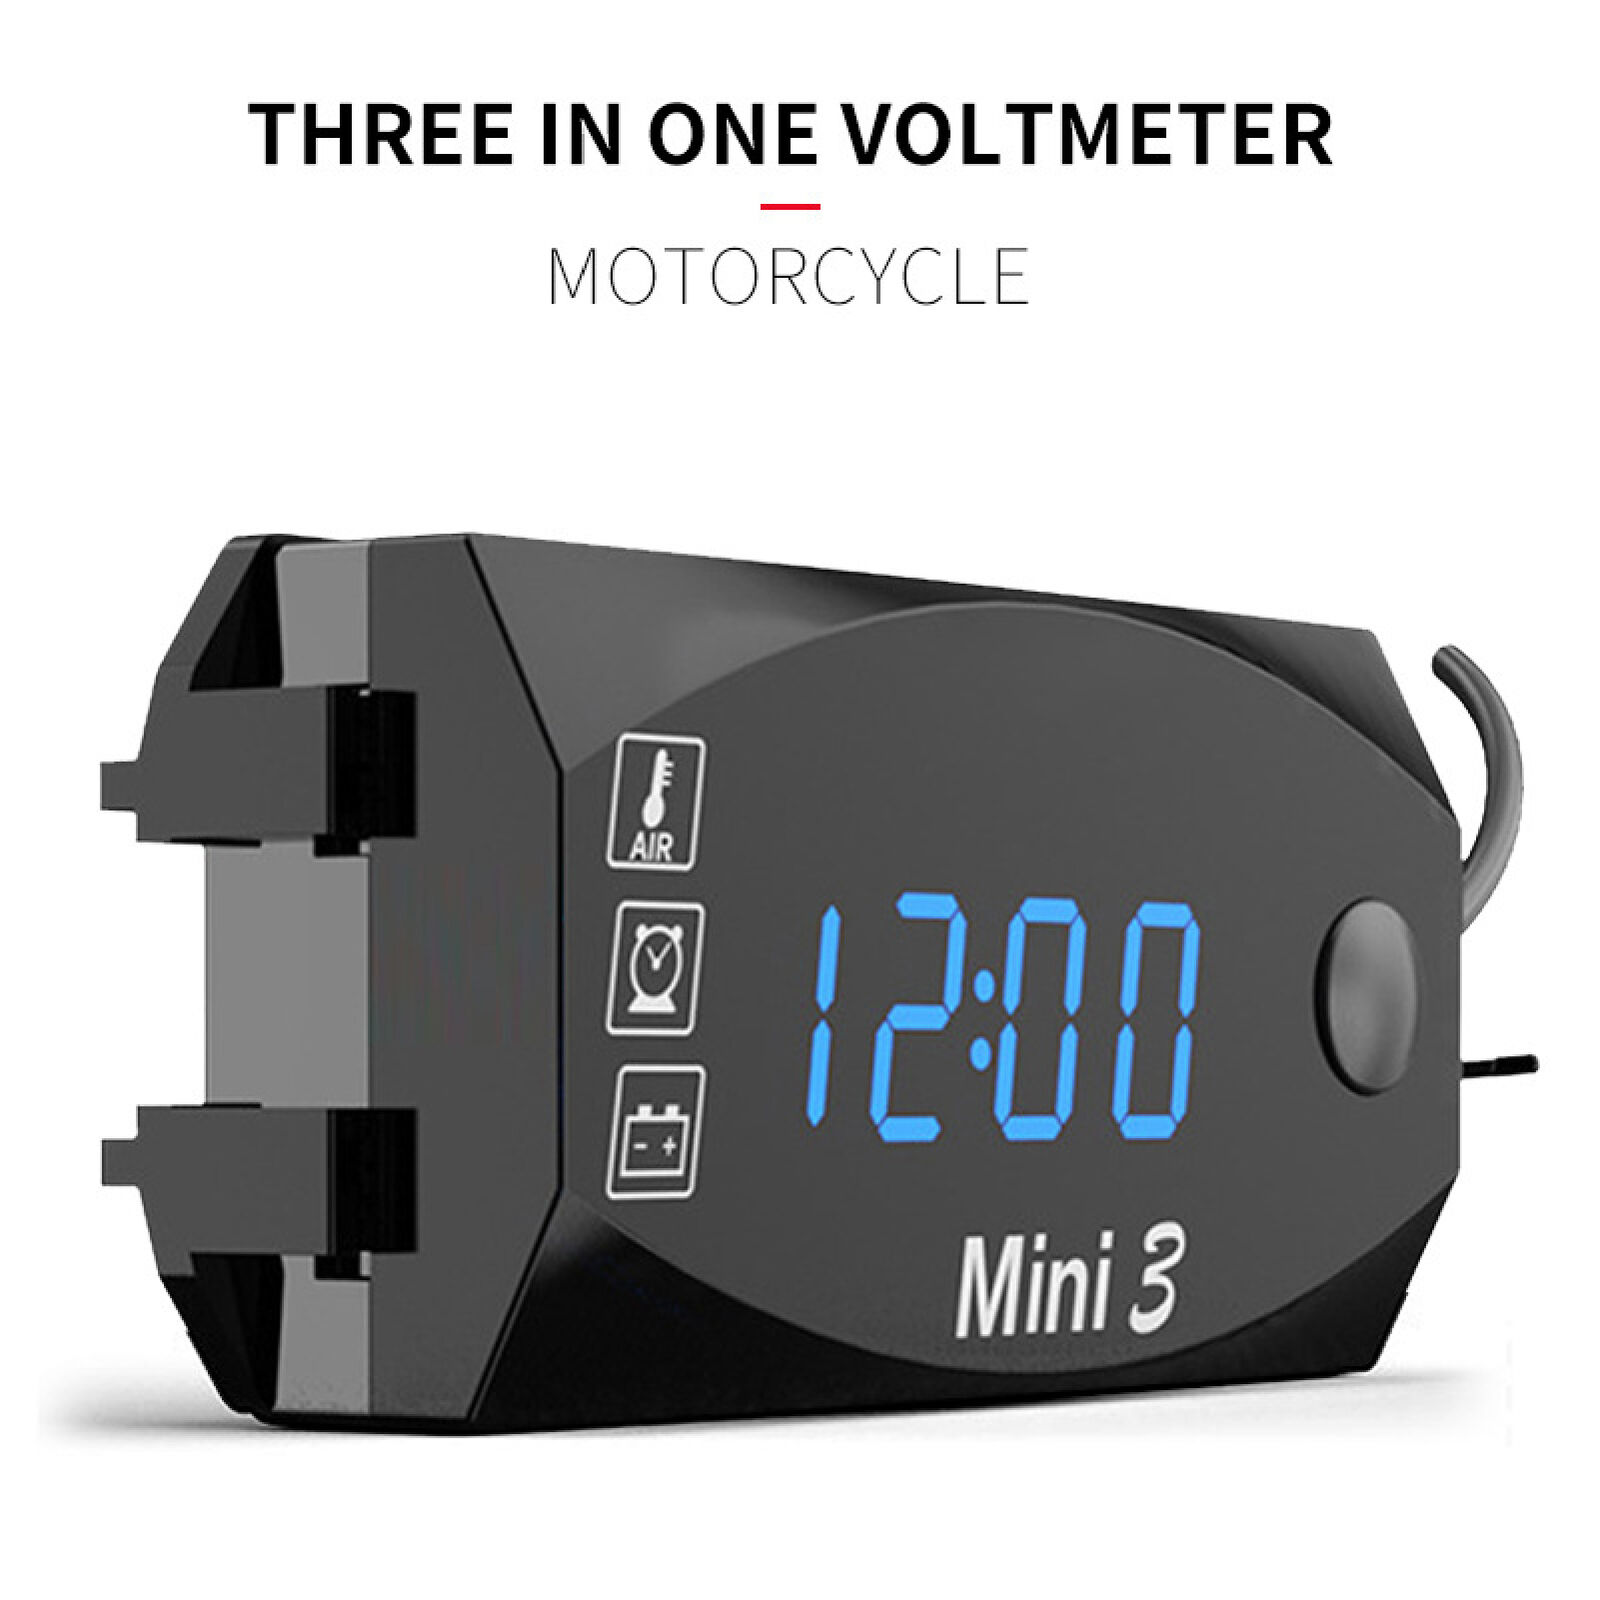 Universal Electronic Clock Thermometer Voltmeter IP67 3 in 1 12V for Motorcycle  Unbranded Does Not Apply - фотография #12